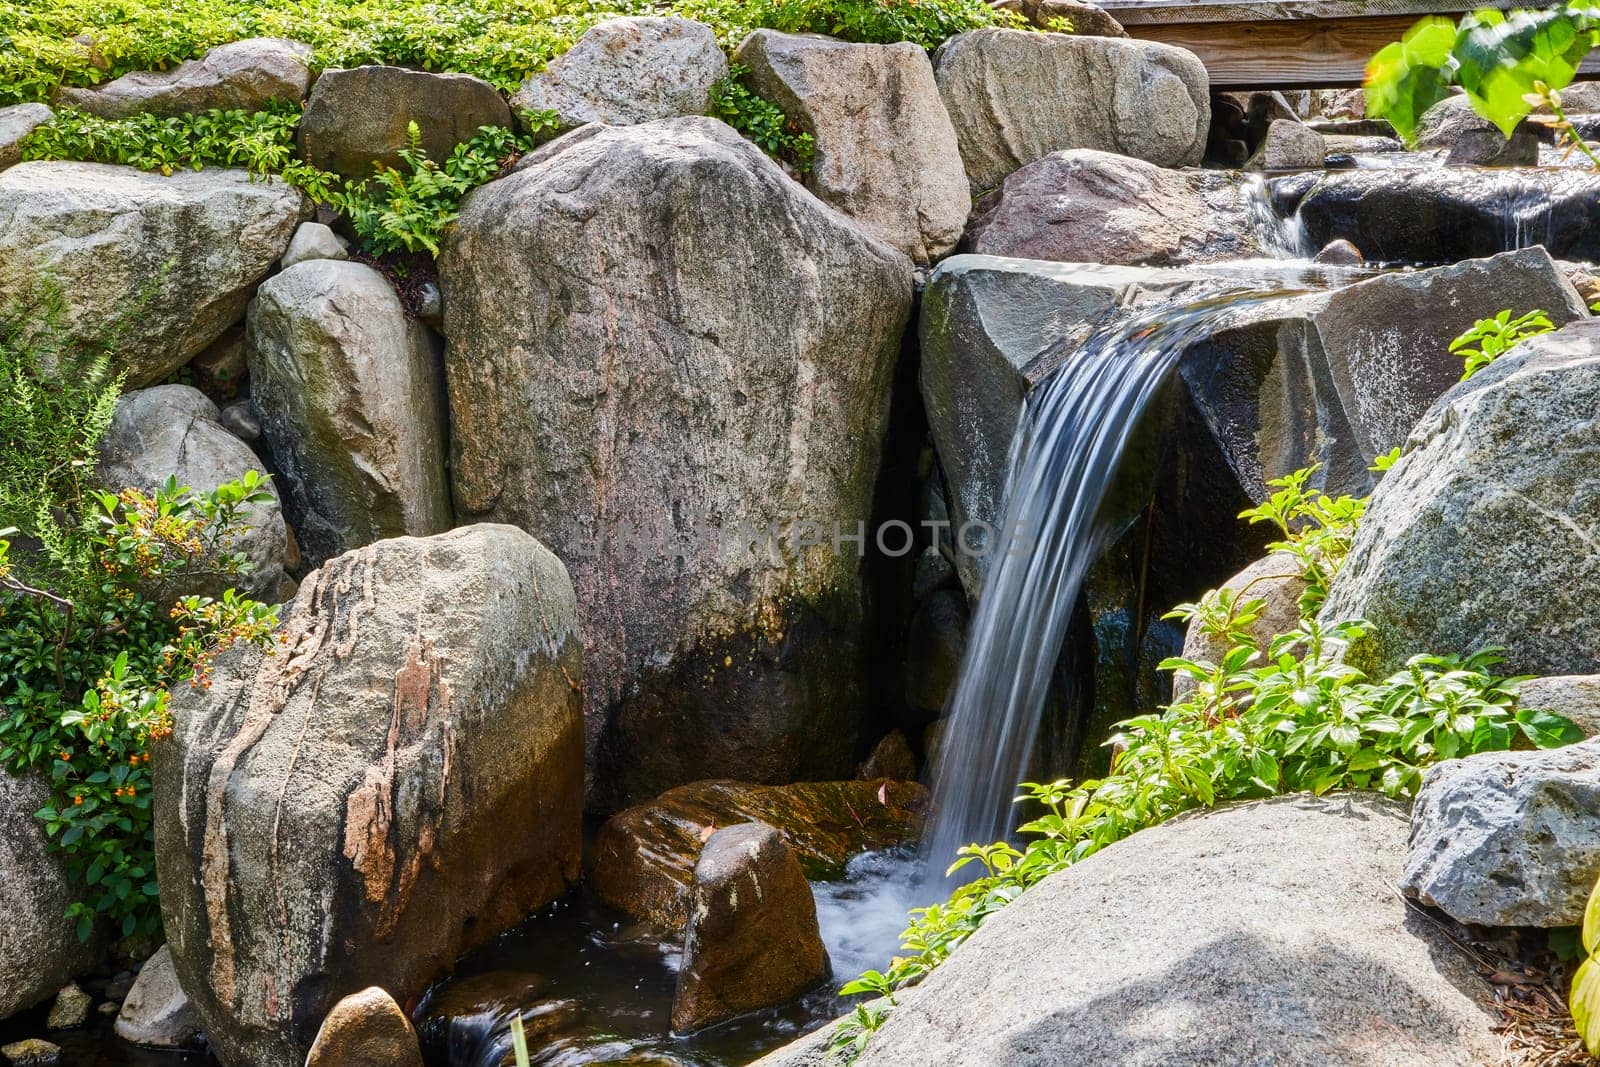 Peaceful man-made waterfall streaming over rugged boulders amidst lush greenery, a tranquil oasis in Elkhart's Botanic Gardens, Indiana, 2023.